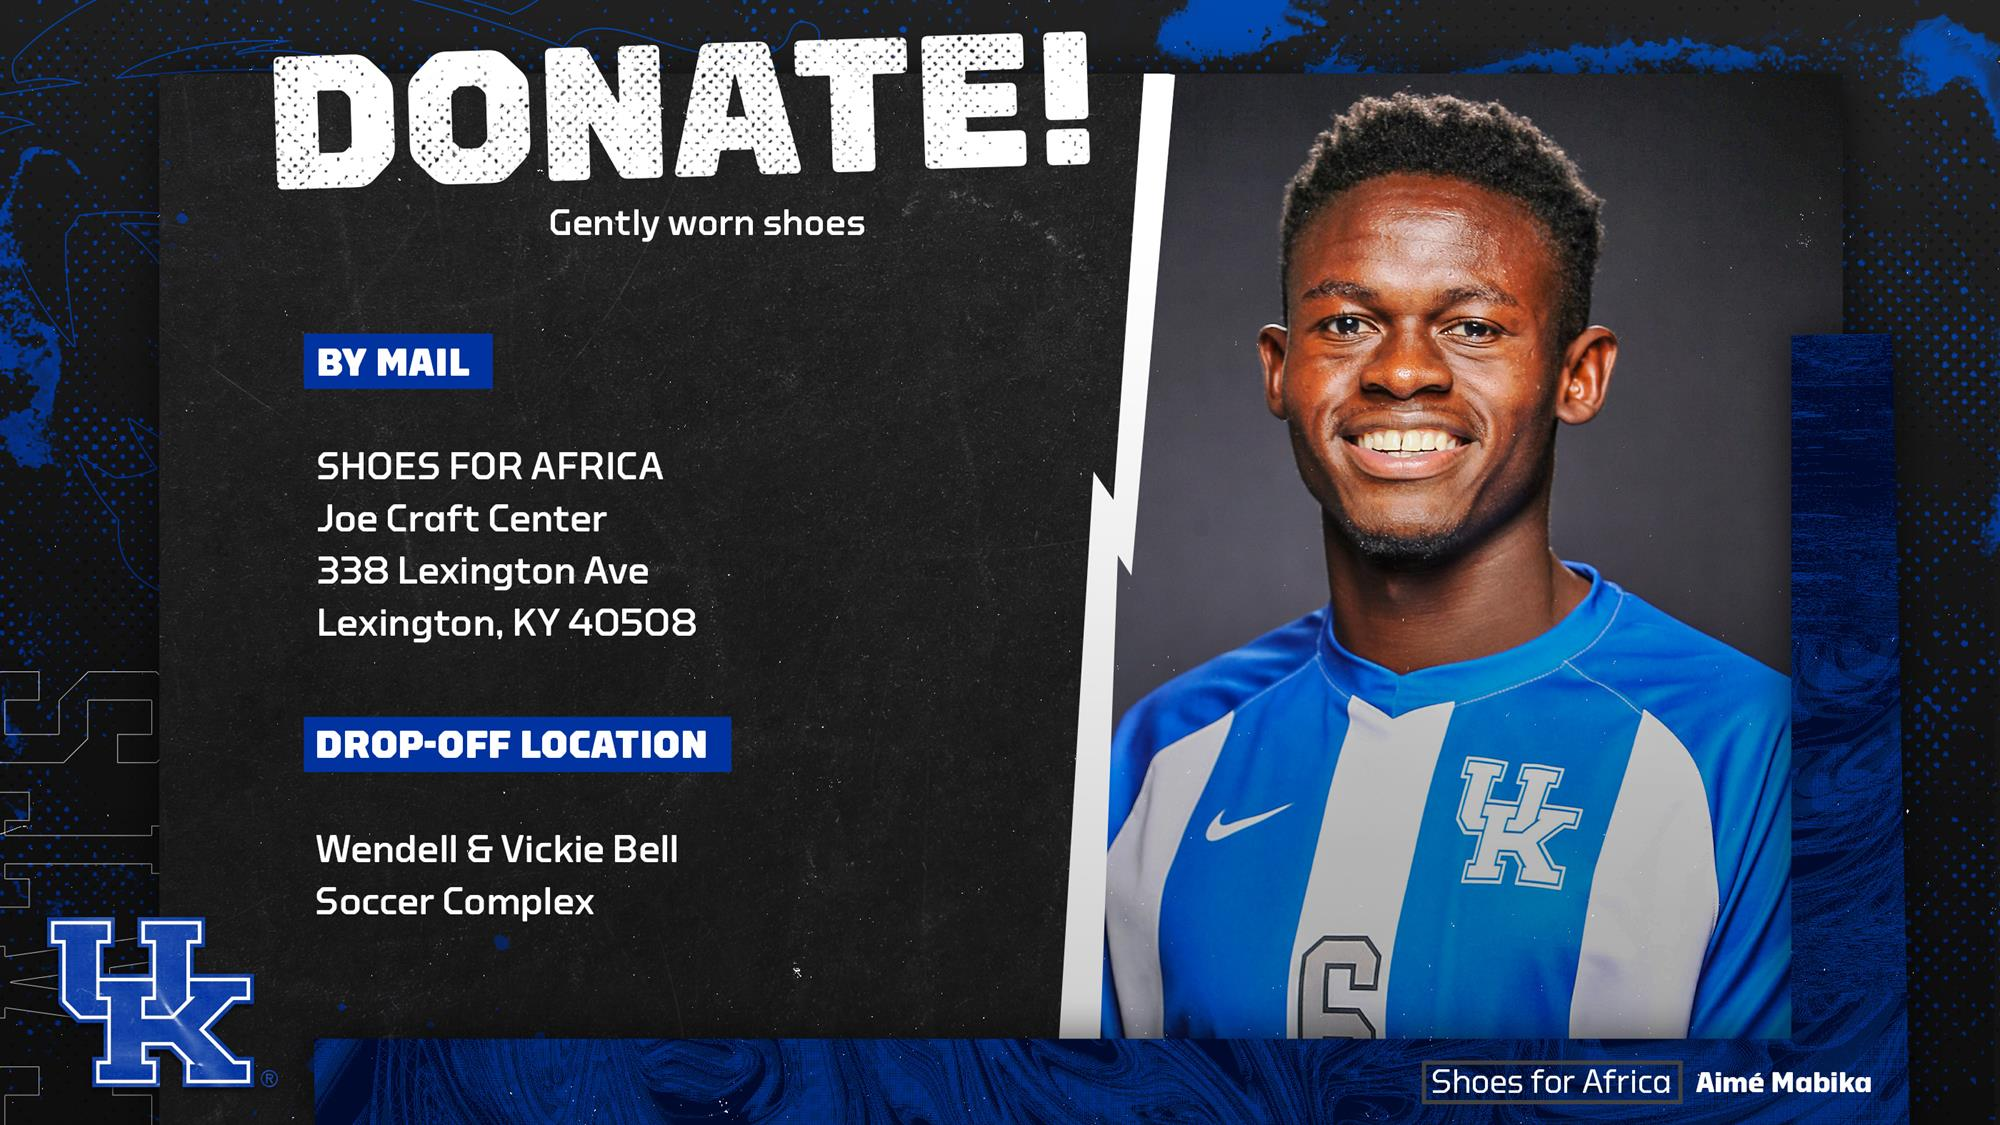 UK Soccer’s Mabika Gives Back with Shoes for Africa